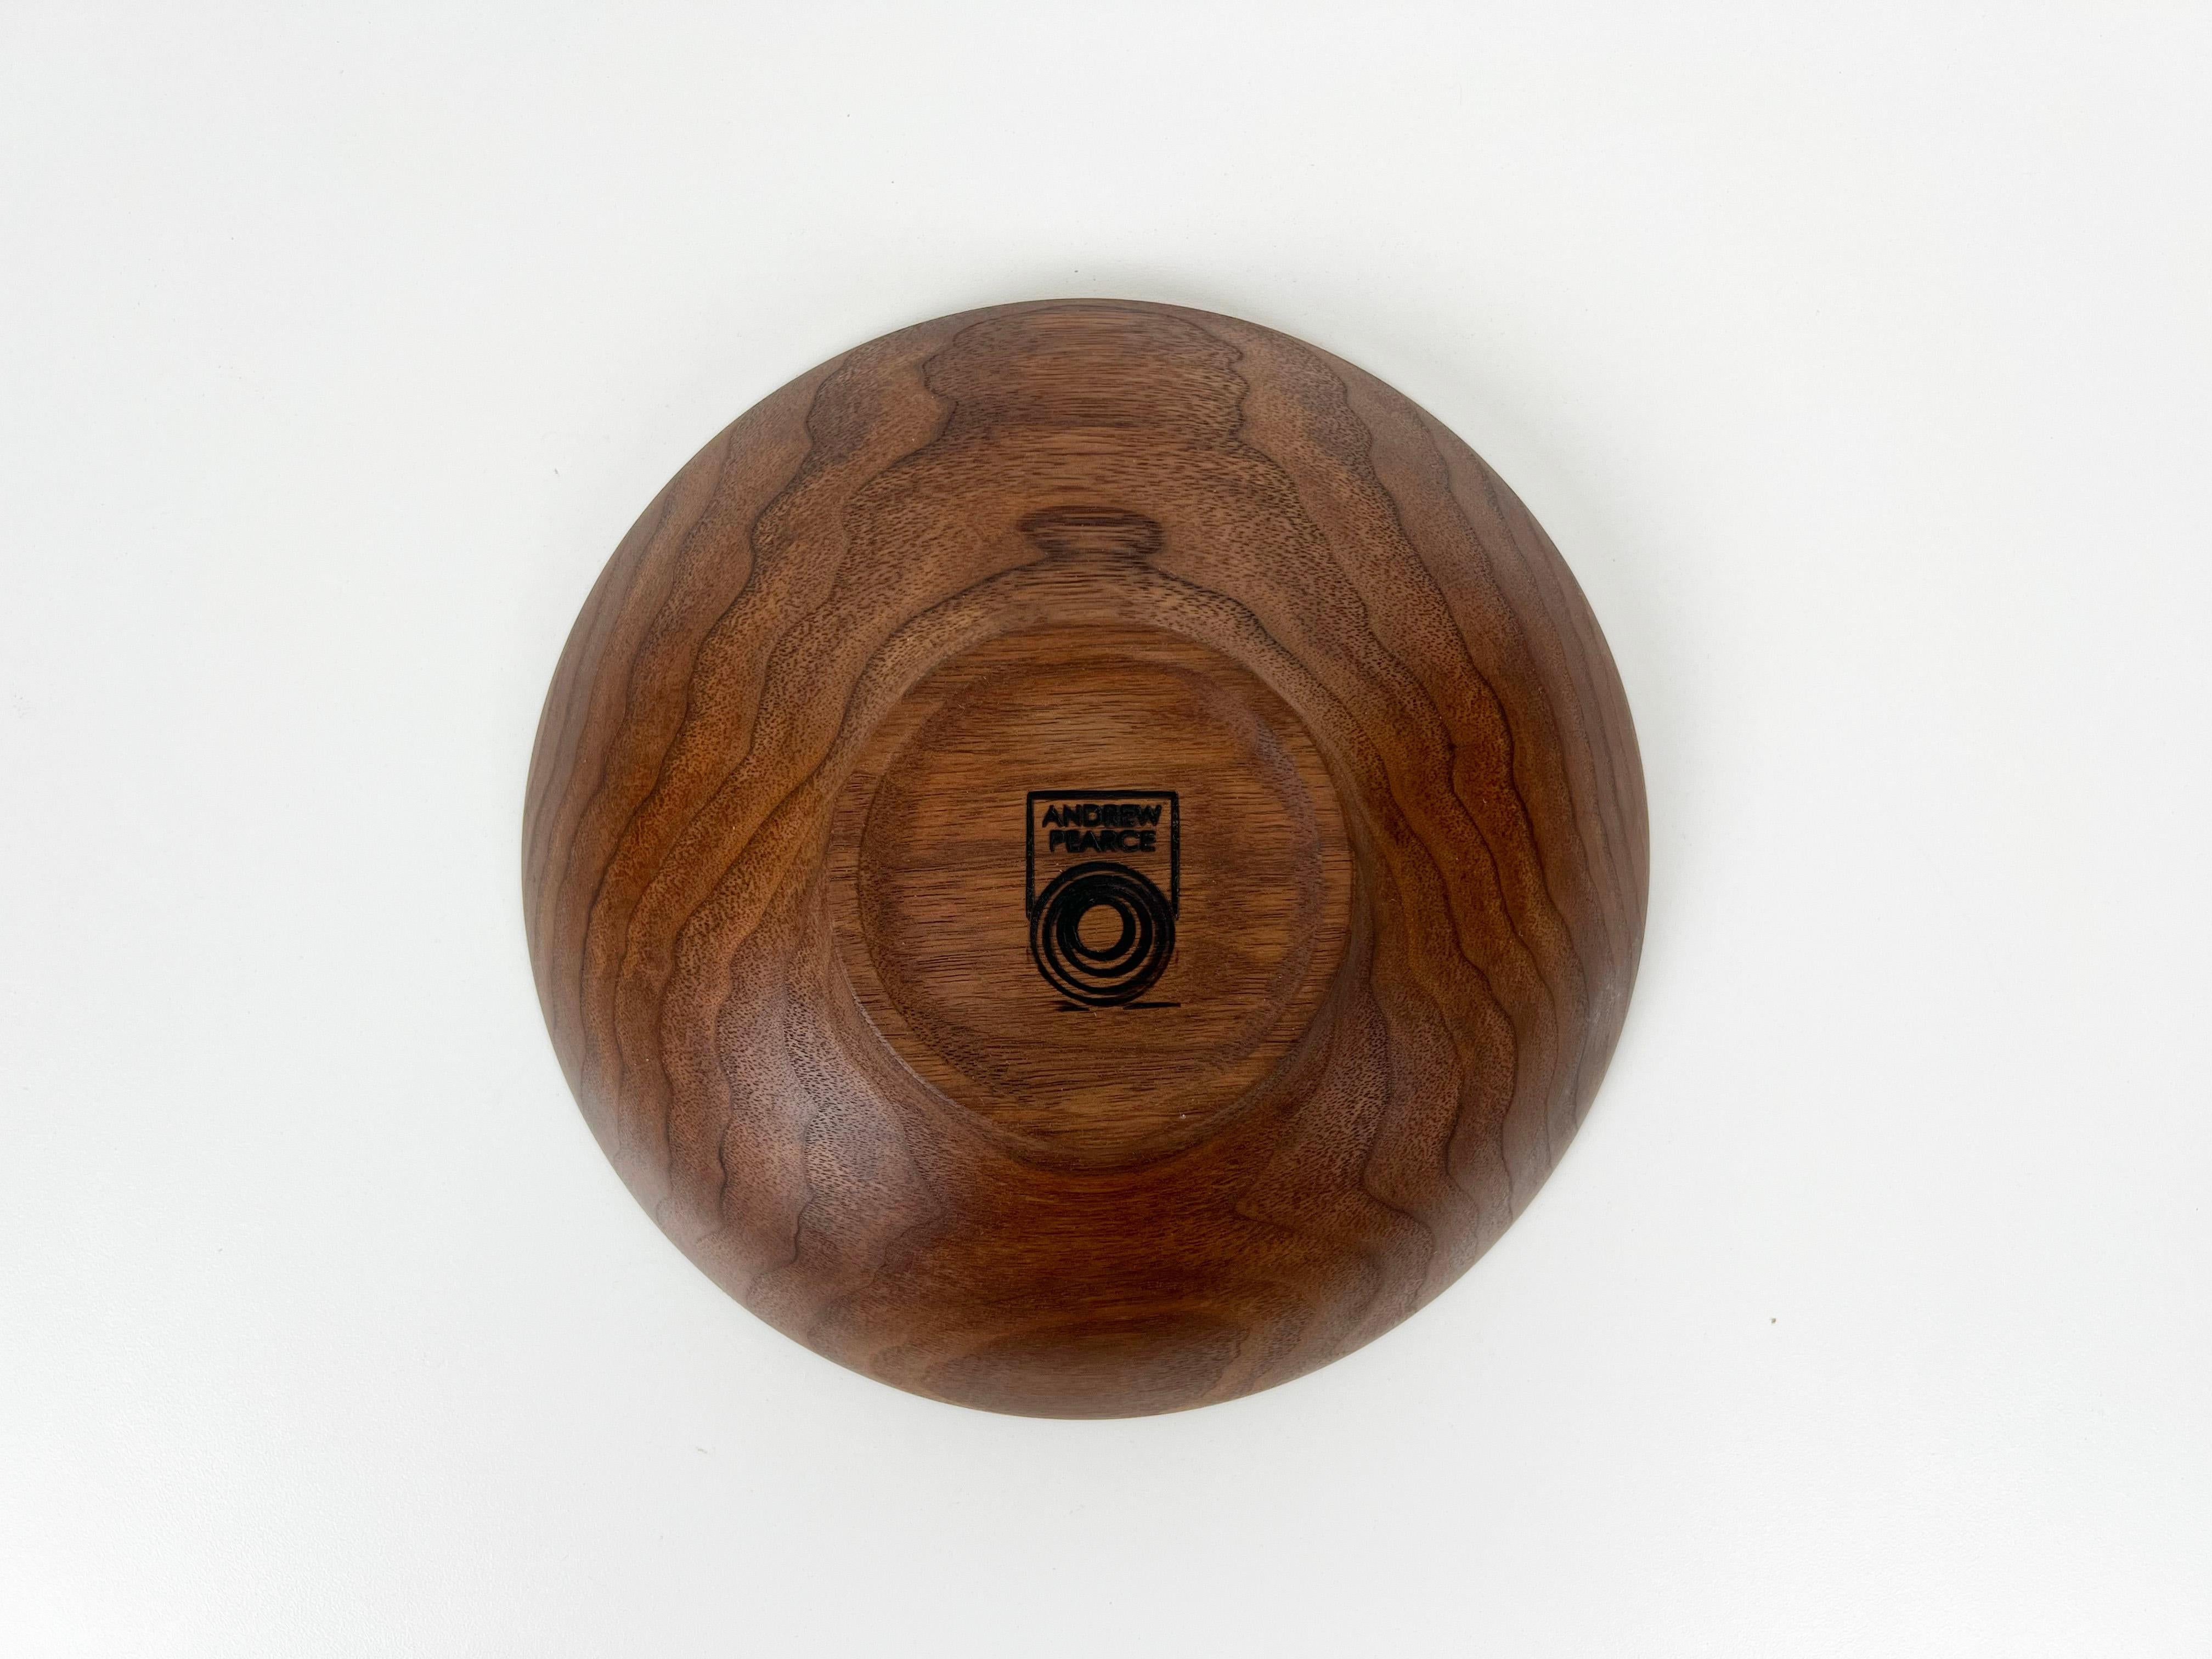 Hand-turned solid wood Champlain serving bowl crafted from beautiful walnut by Andrew Pearce. Finished with food safe allergen-free wood oil.

Artist: Andrew Pearce

Year: 2000s

Origin: Vermont, USA

Dimensions: 2.75